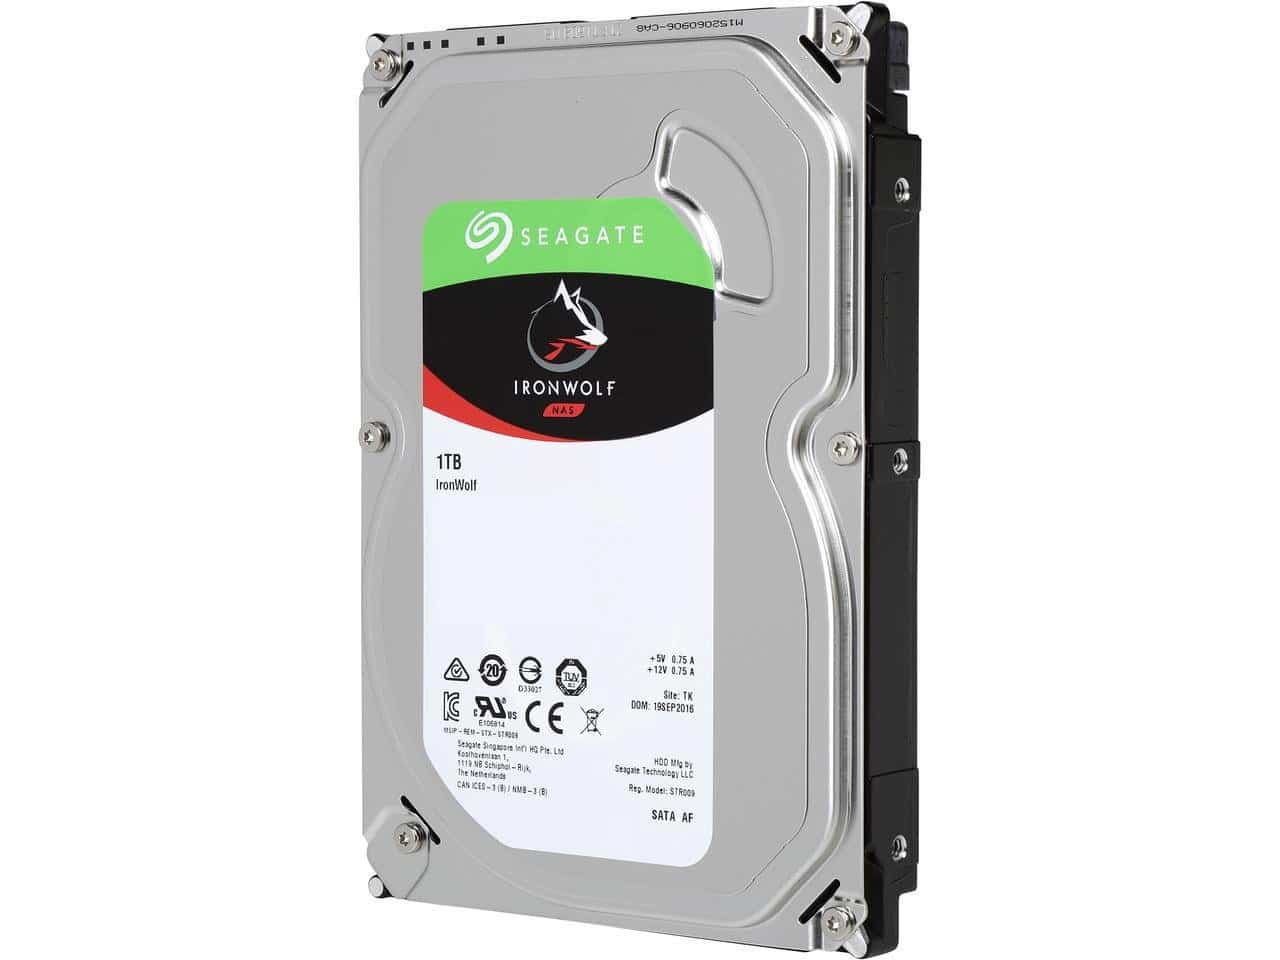 Get this Seagate IronWolf 12TB NAS hard drive for its all-time low